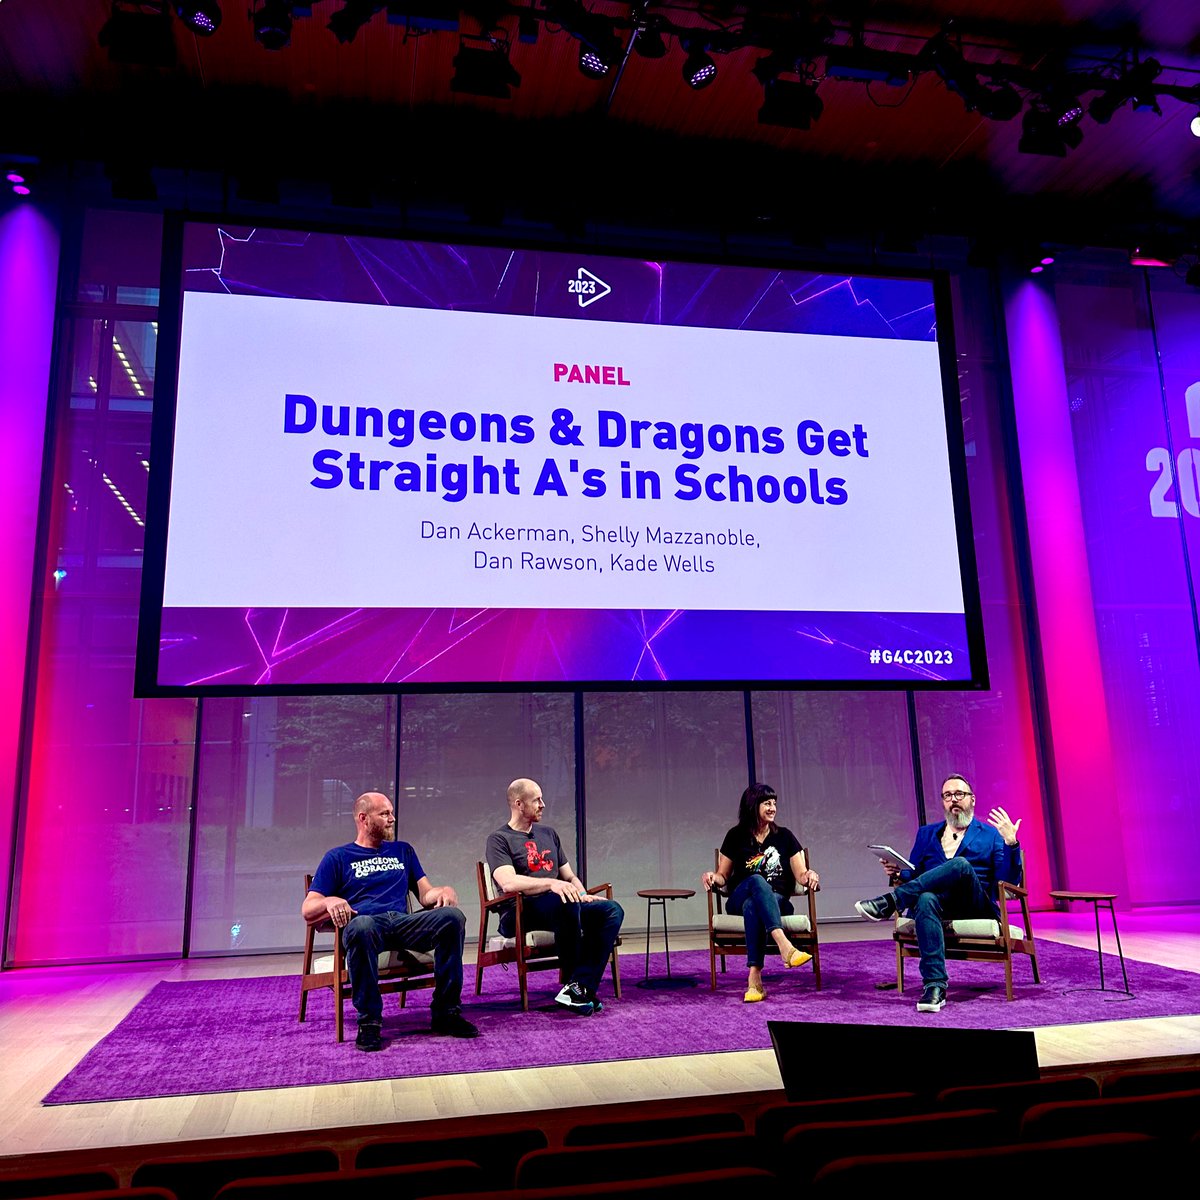 So many great questions being asked by @danackerman about @Wizards_DnD in the classroom! #G4C2023